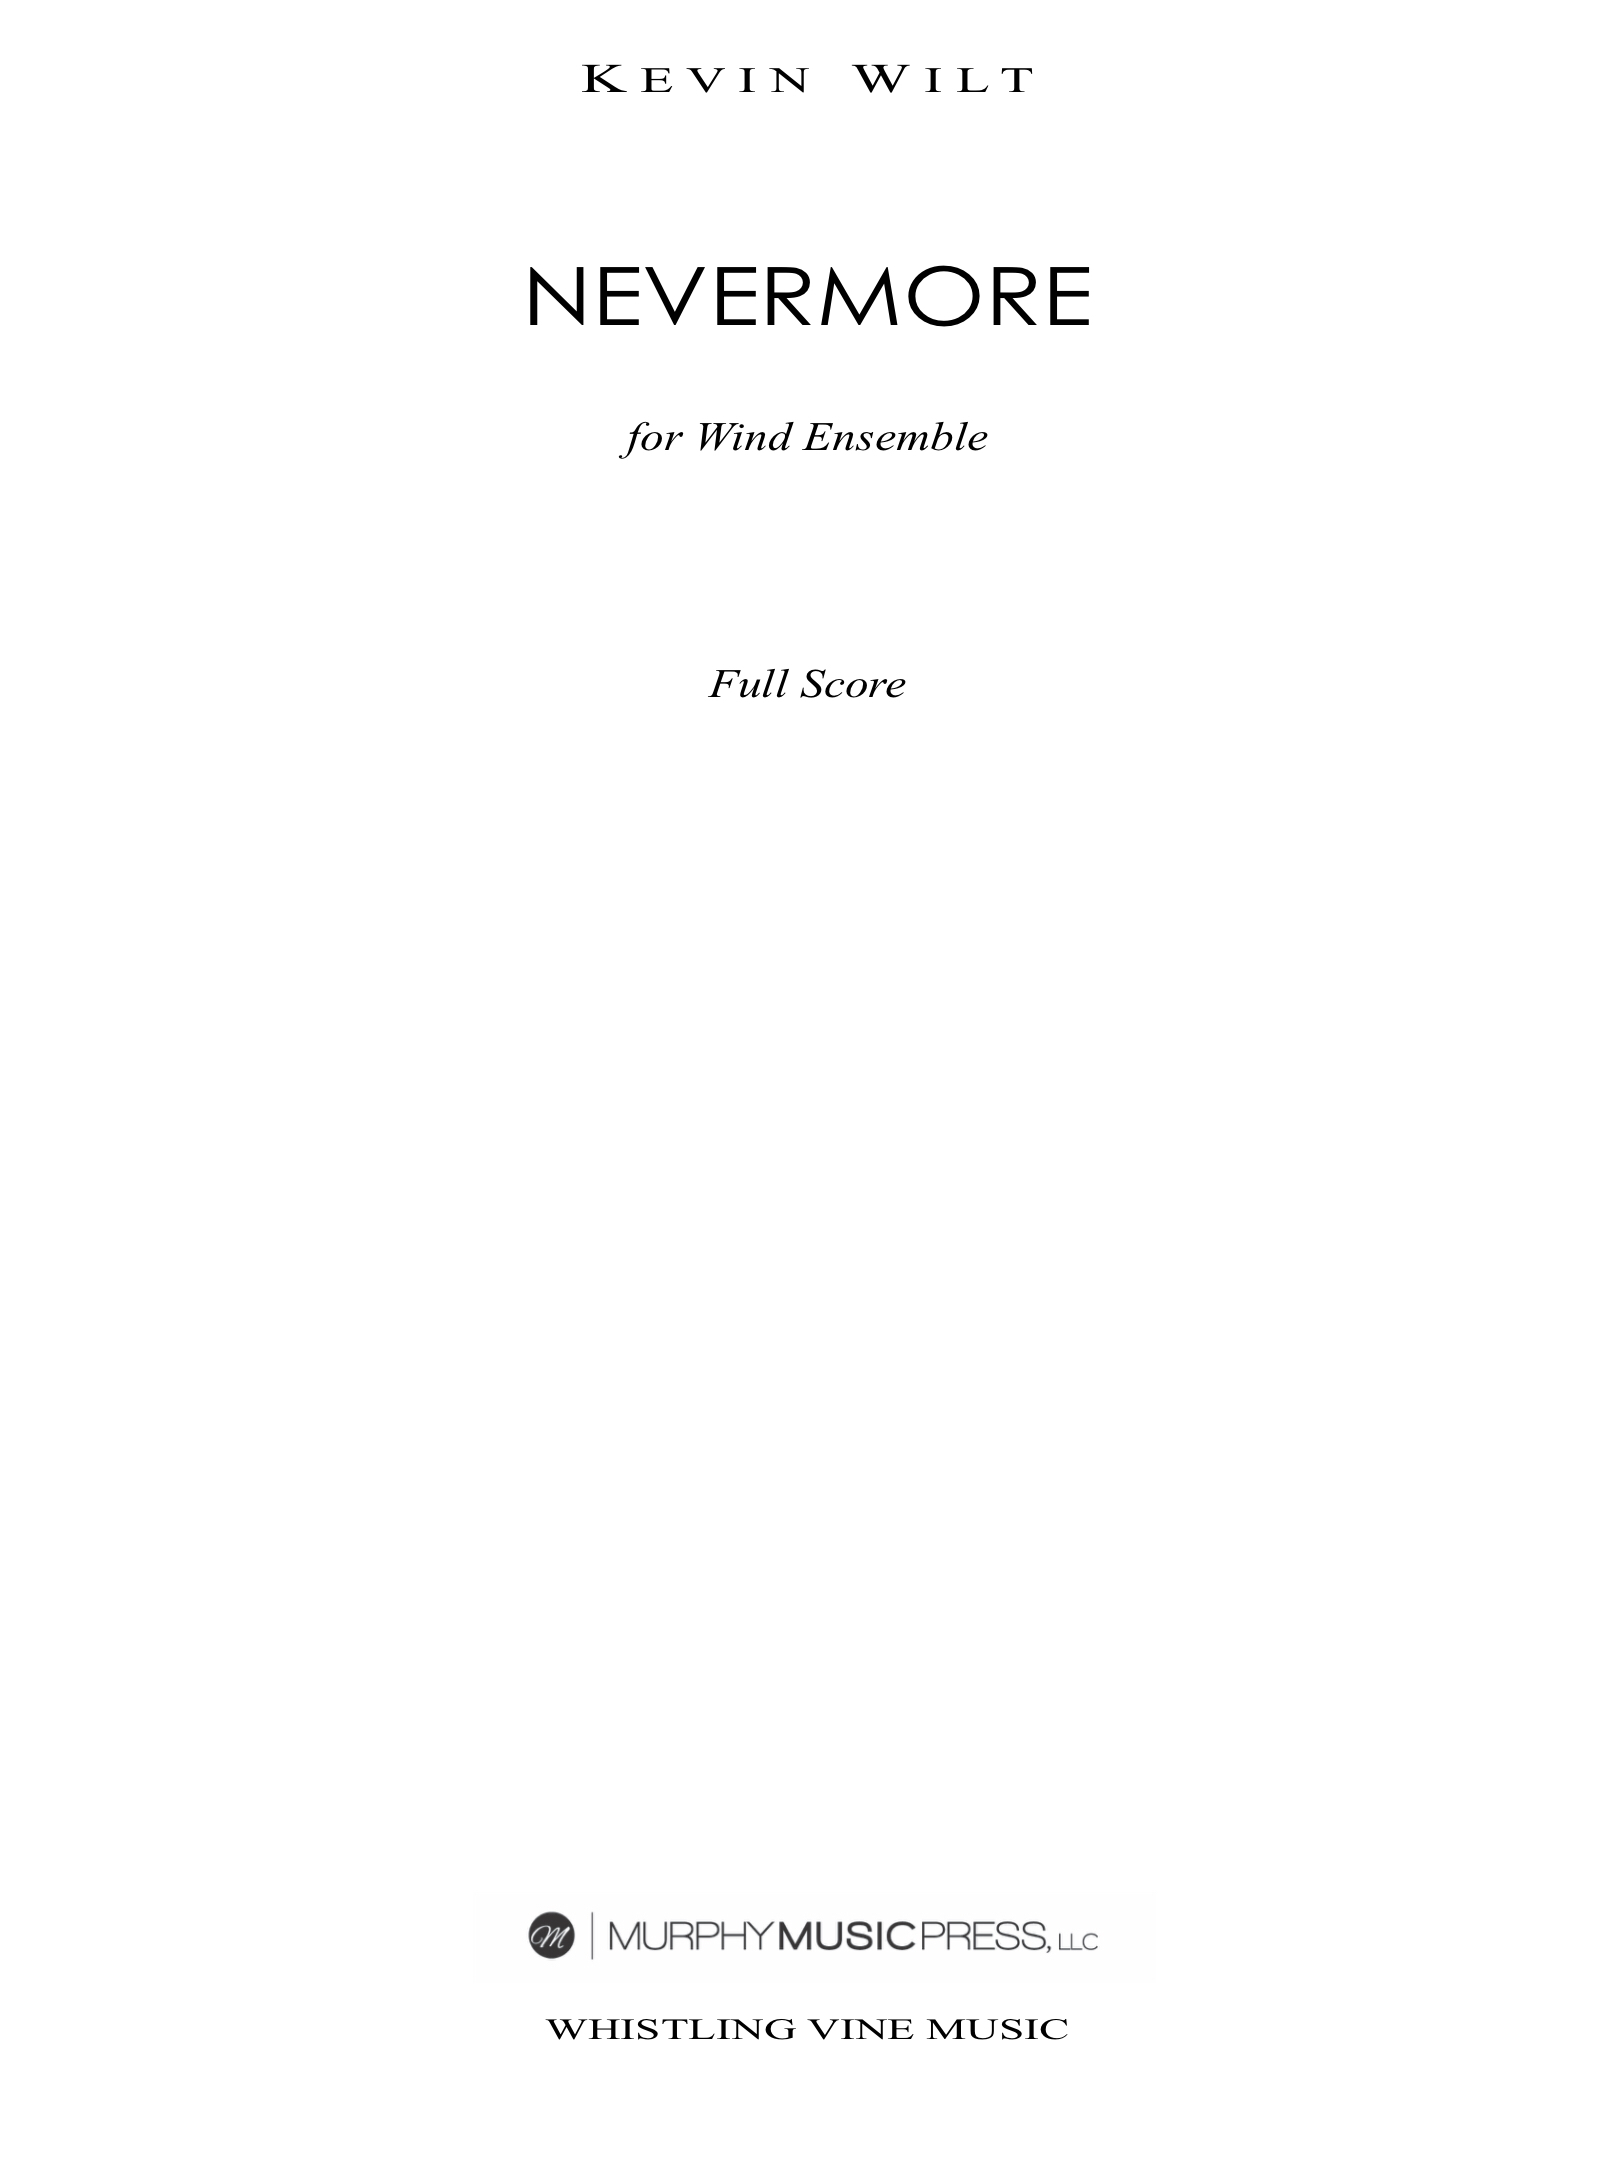 Nevermore (Parts Rental Only) by Kevin Wilt